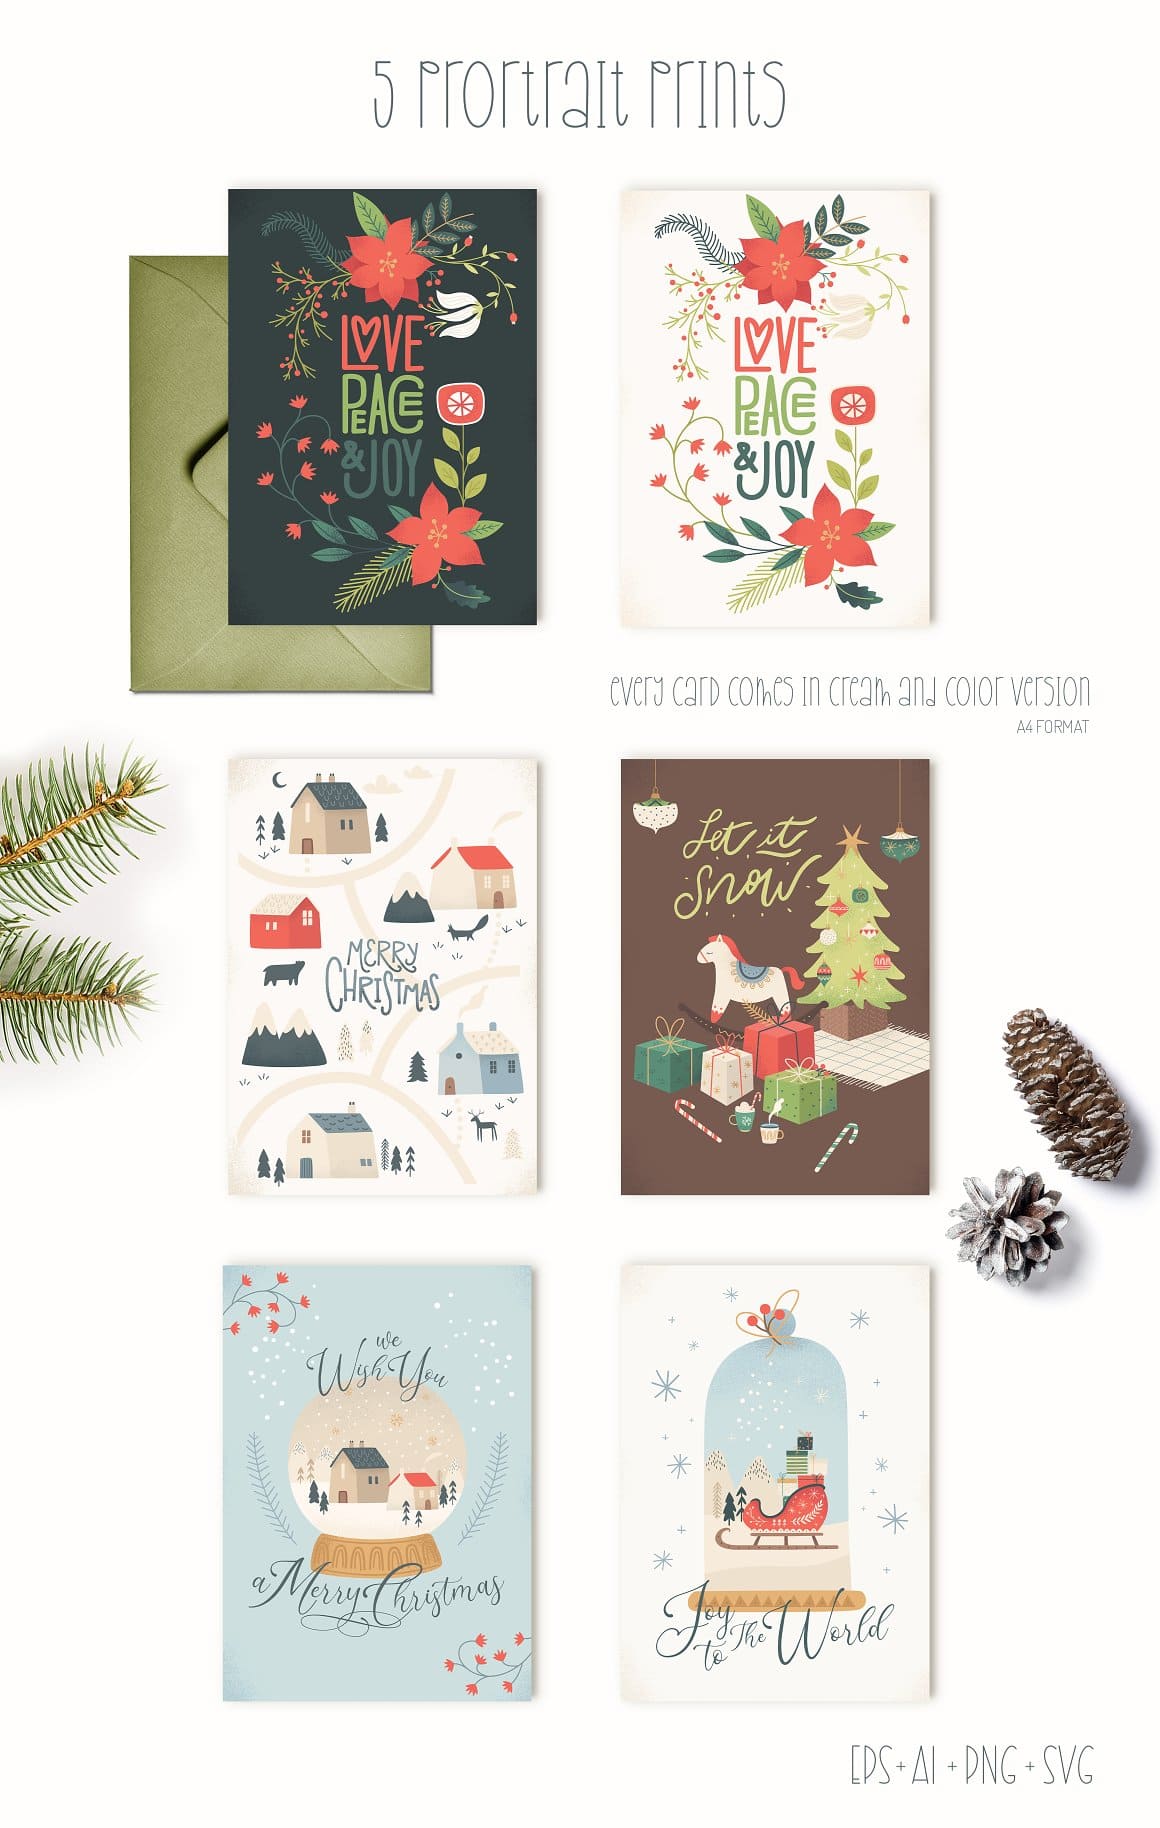 Every Christmas card comes in cream and color version.